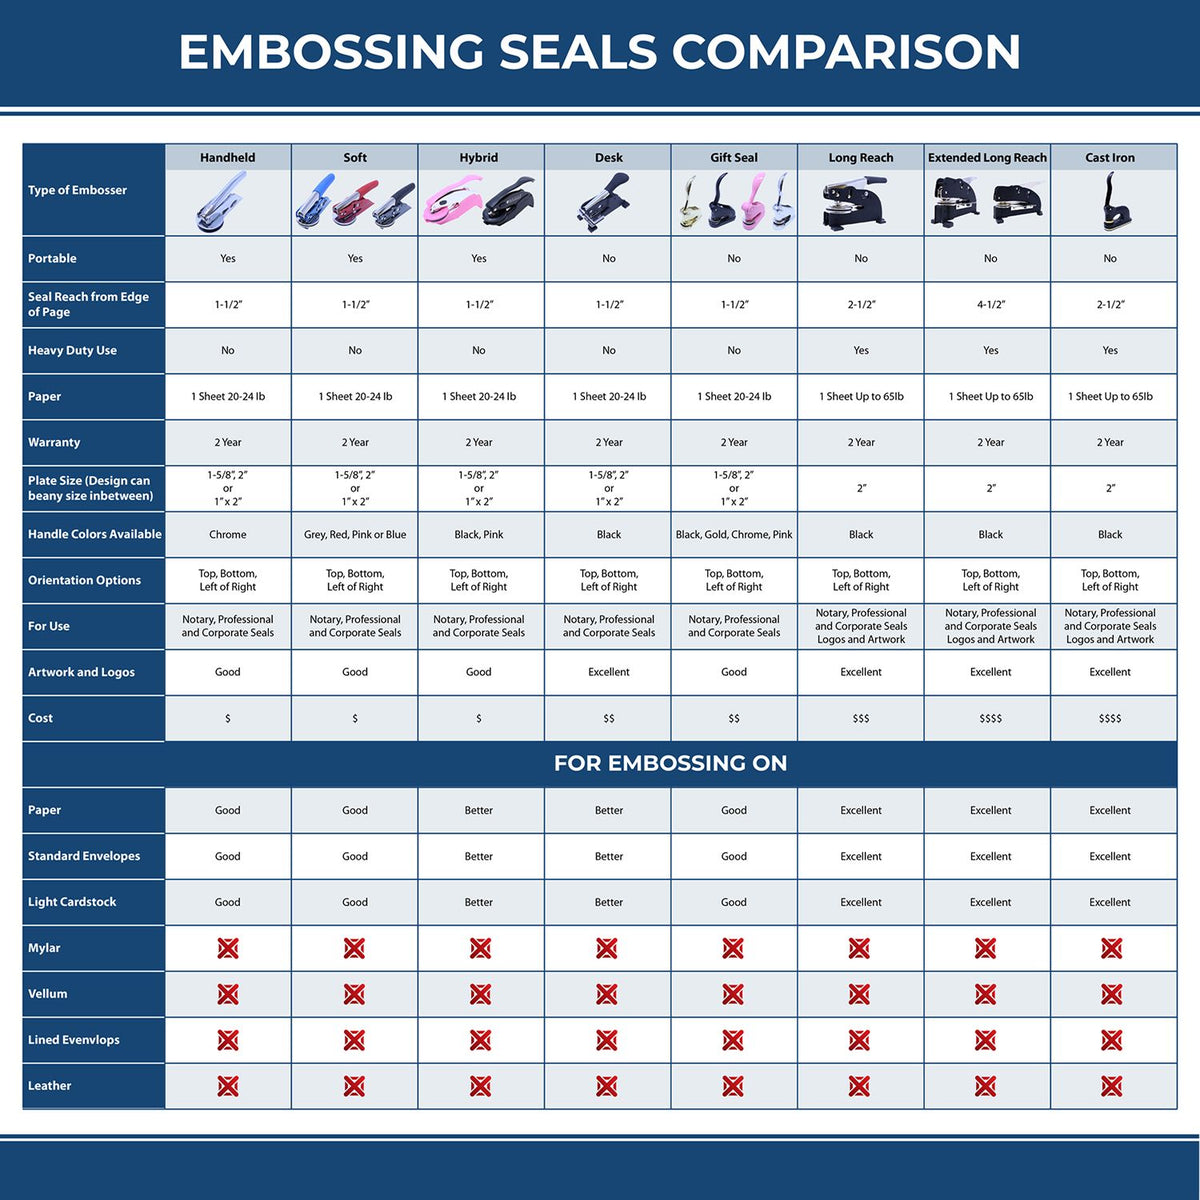 A comparison chart for the different types of mount models available for the Soft Pocket Tennessee Landscape Architect Embosser.